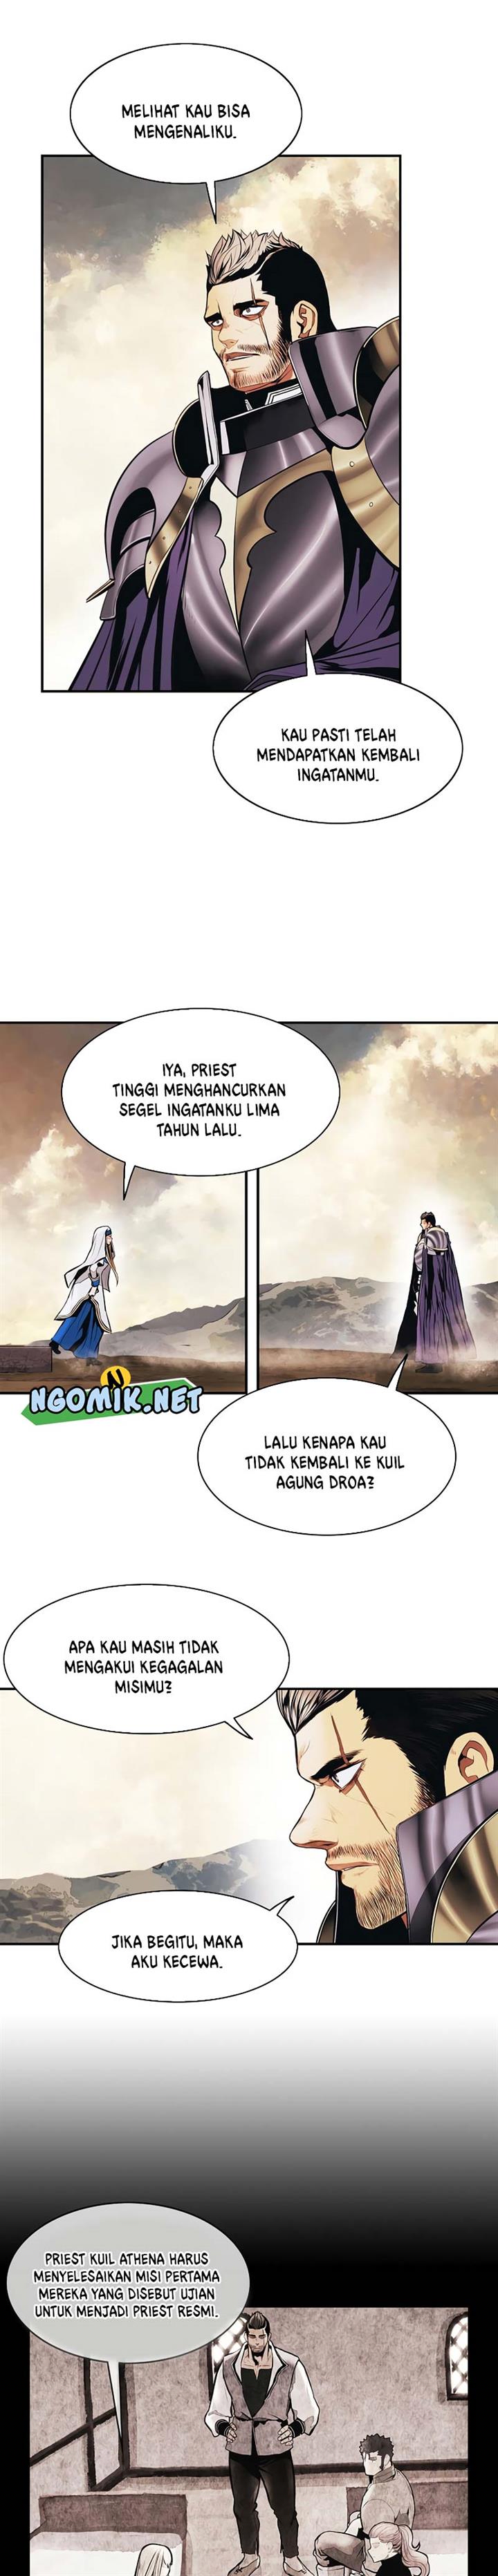 MookHyang – Dark Lady Chapter 174